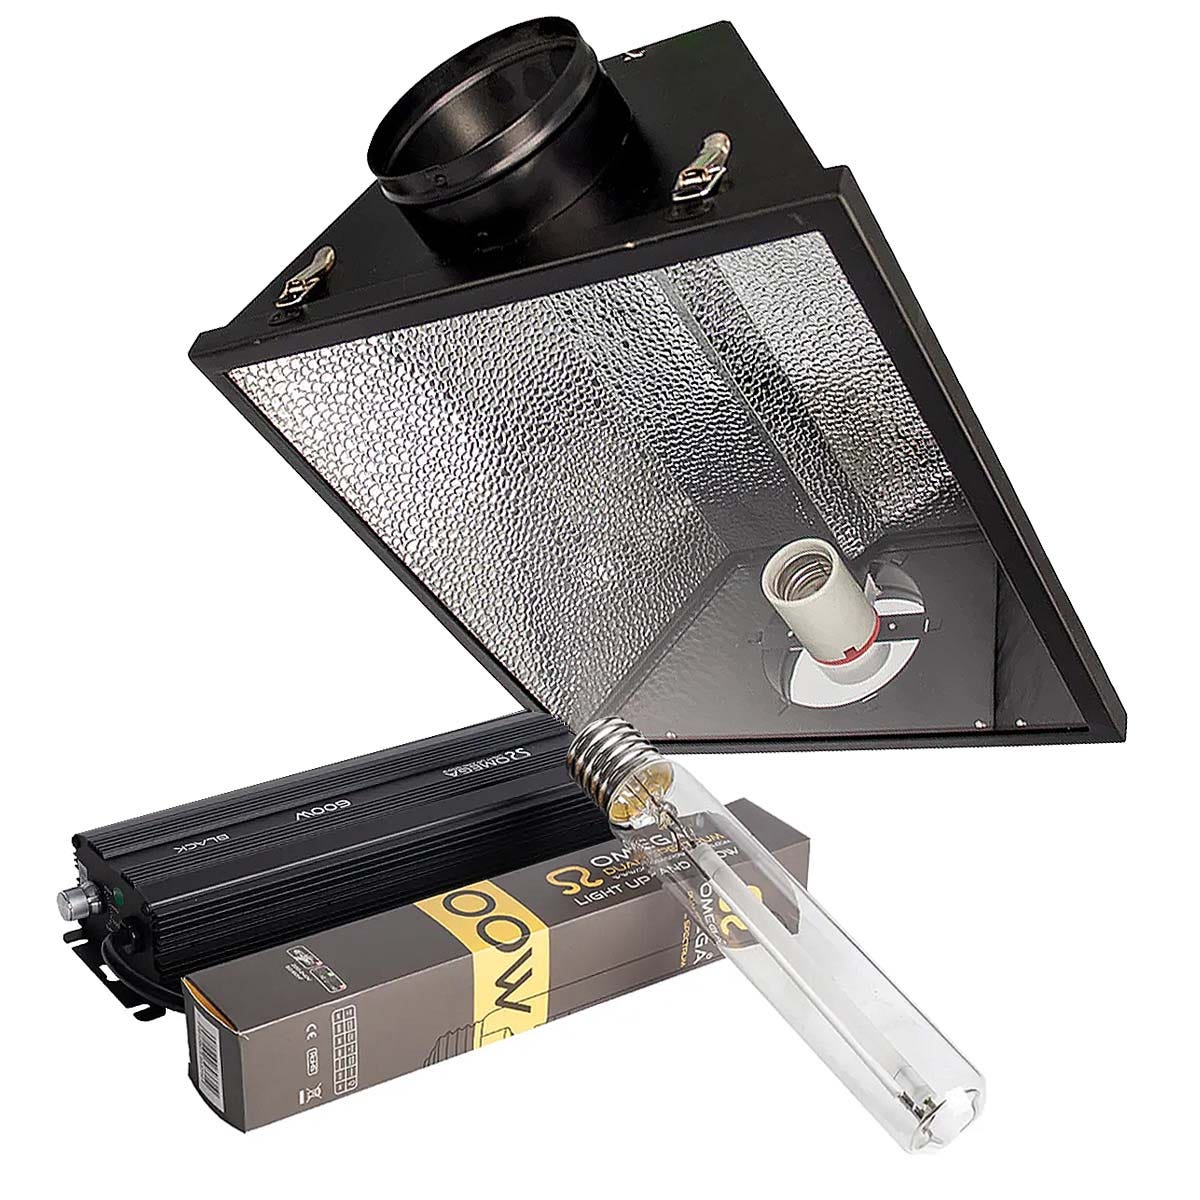 600w Air Cooled Grow Light Kits with a Choice of Ballast